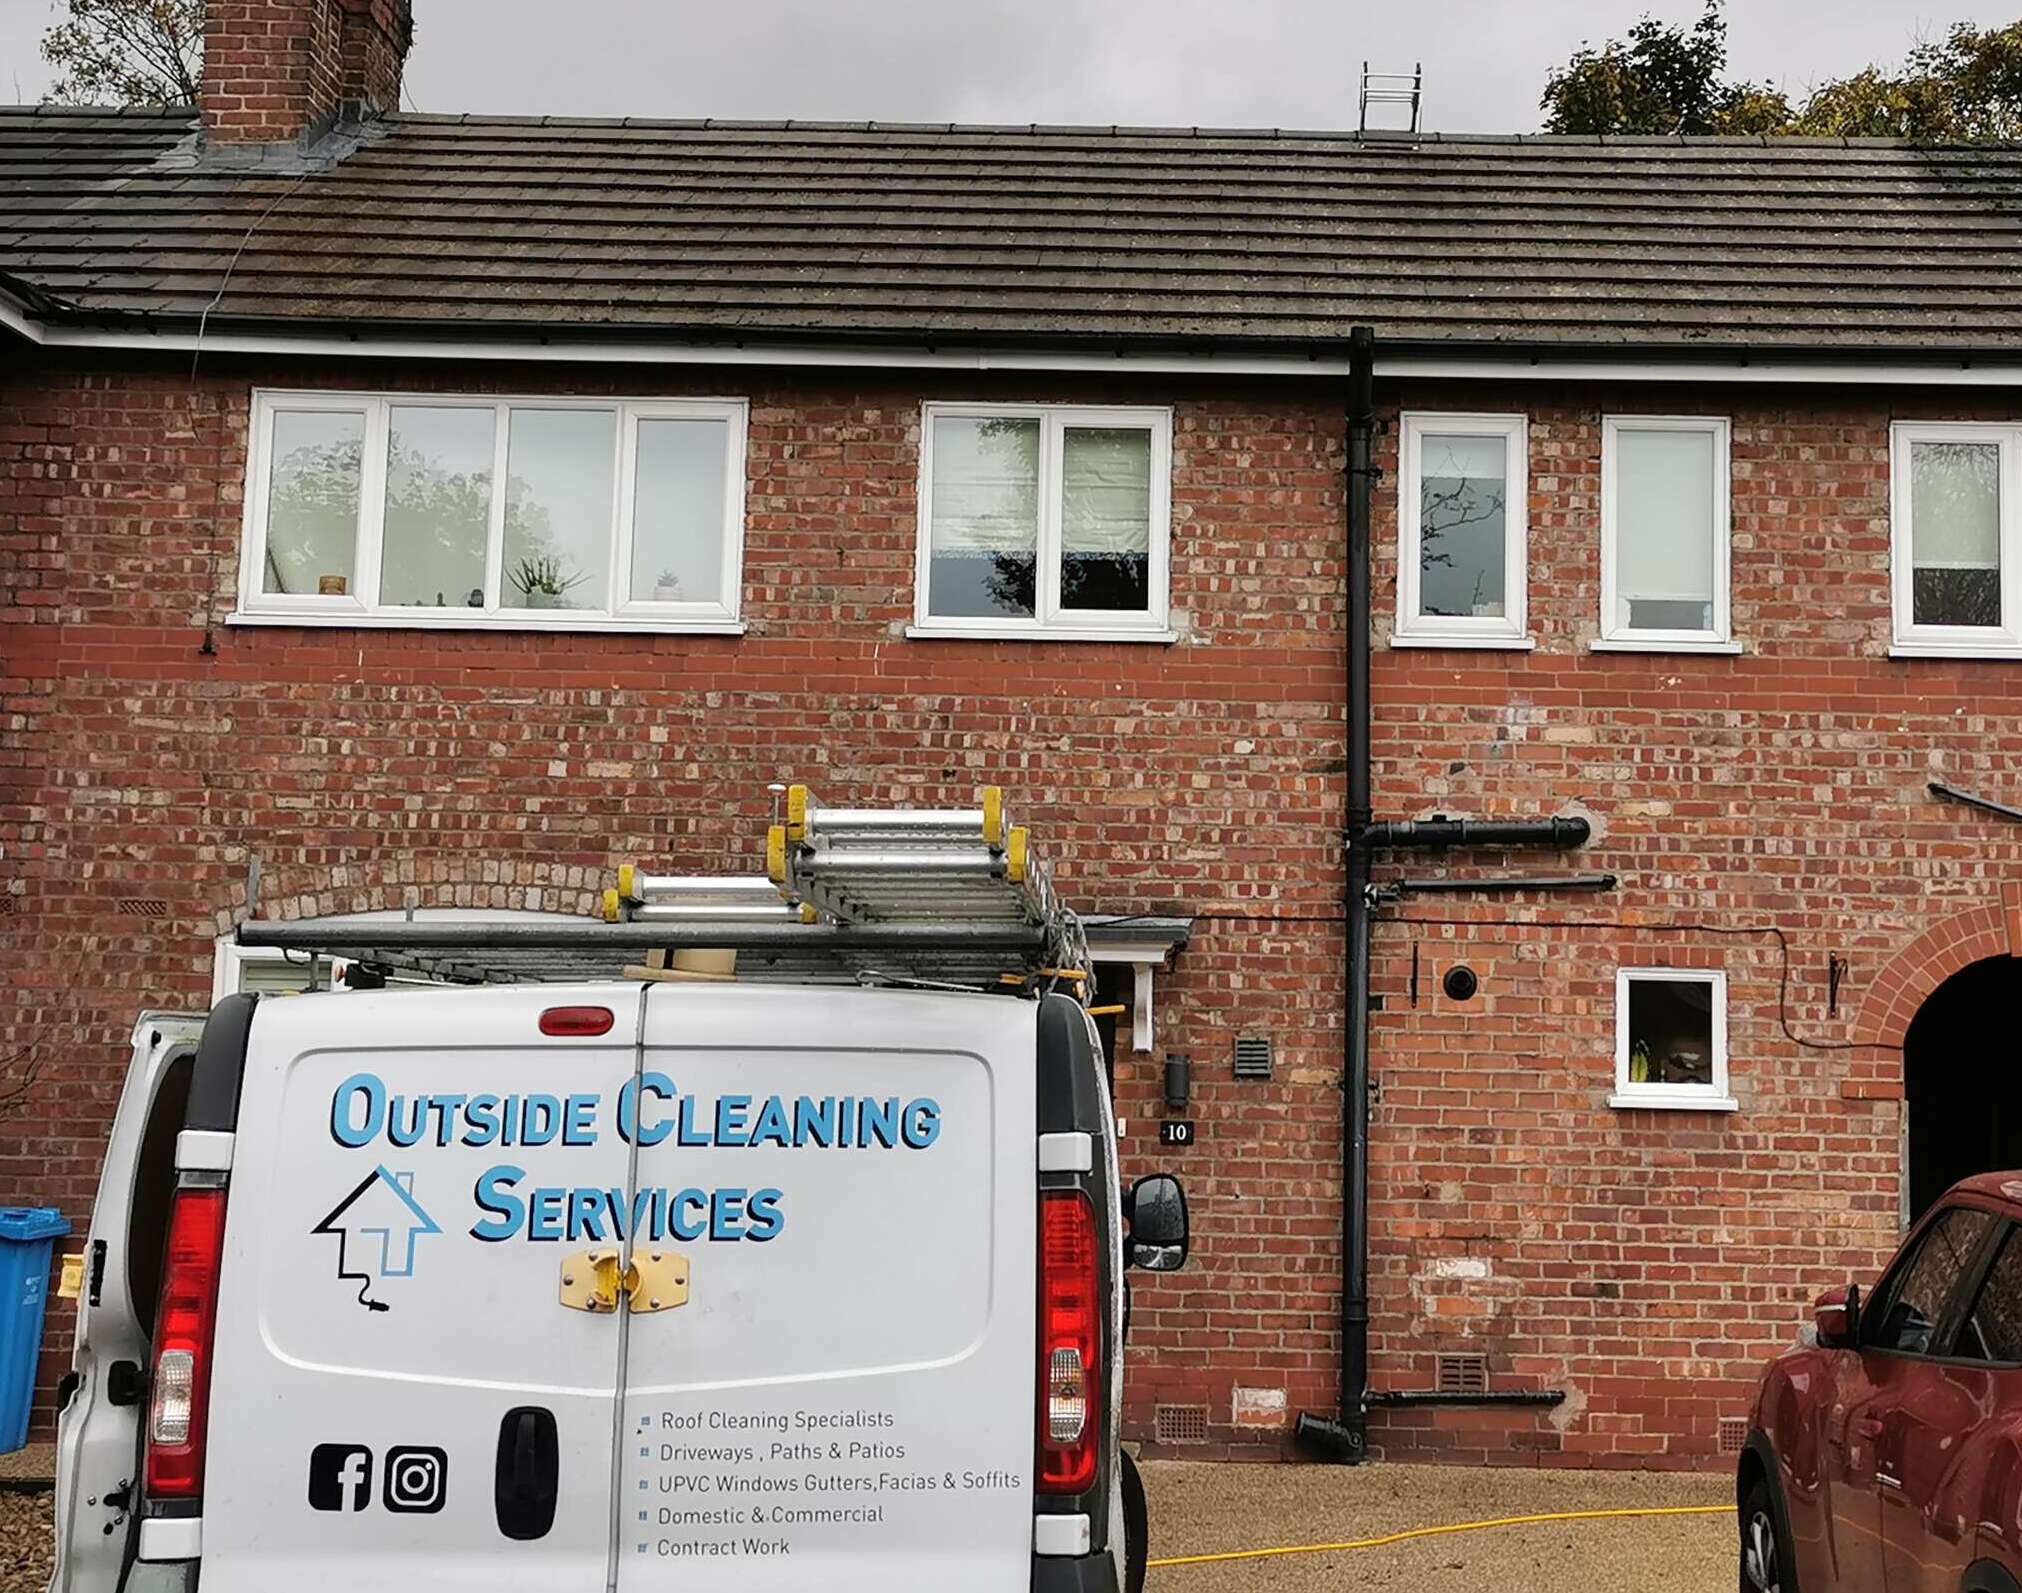 Outside Cleaning Services, Cleaning Service, Pressure Cleaning, Roof Cleaning, Driveways, Patio, Paths, Upvc Cleaning, Professional And Cheap Cleaning Services, Facade Cleaning, Outside Cleaning